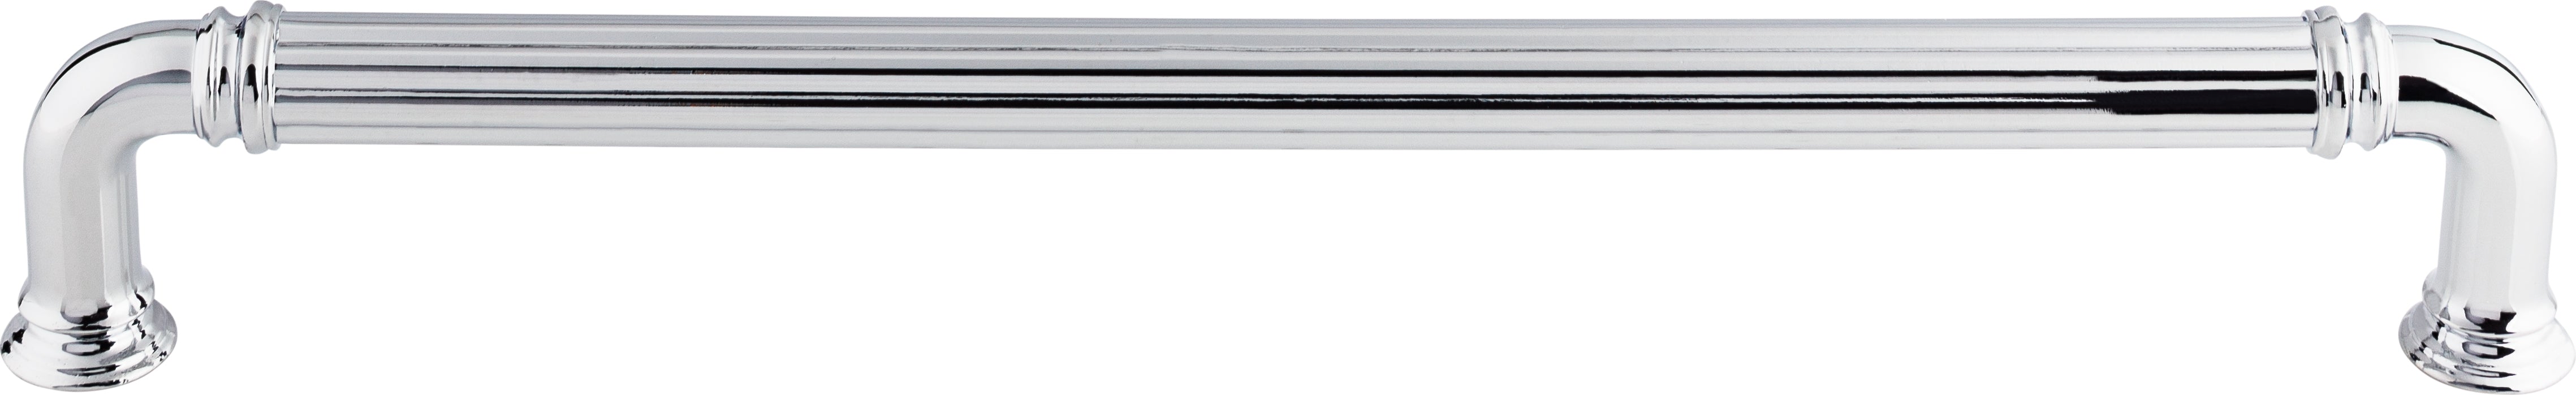 Reeded Appliance Pull 18 Inch (c-c)